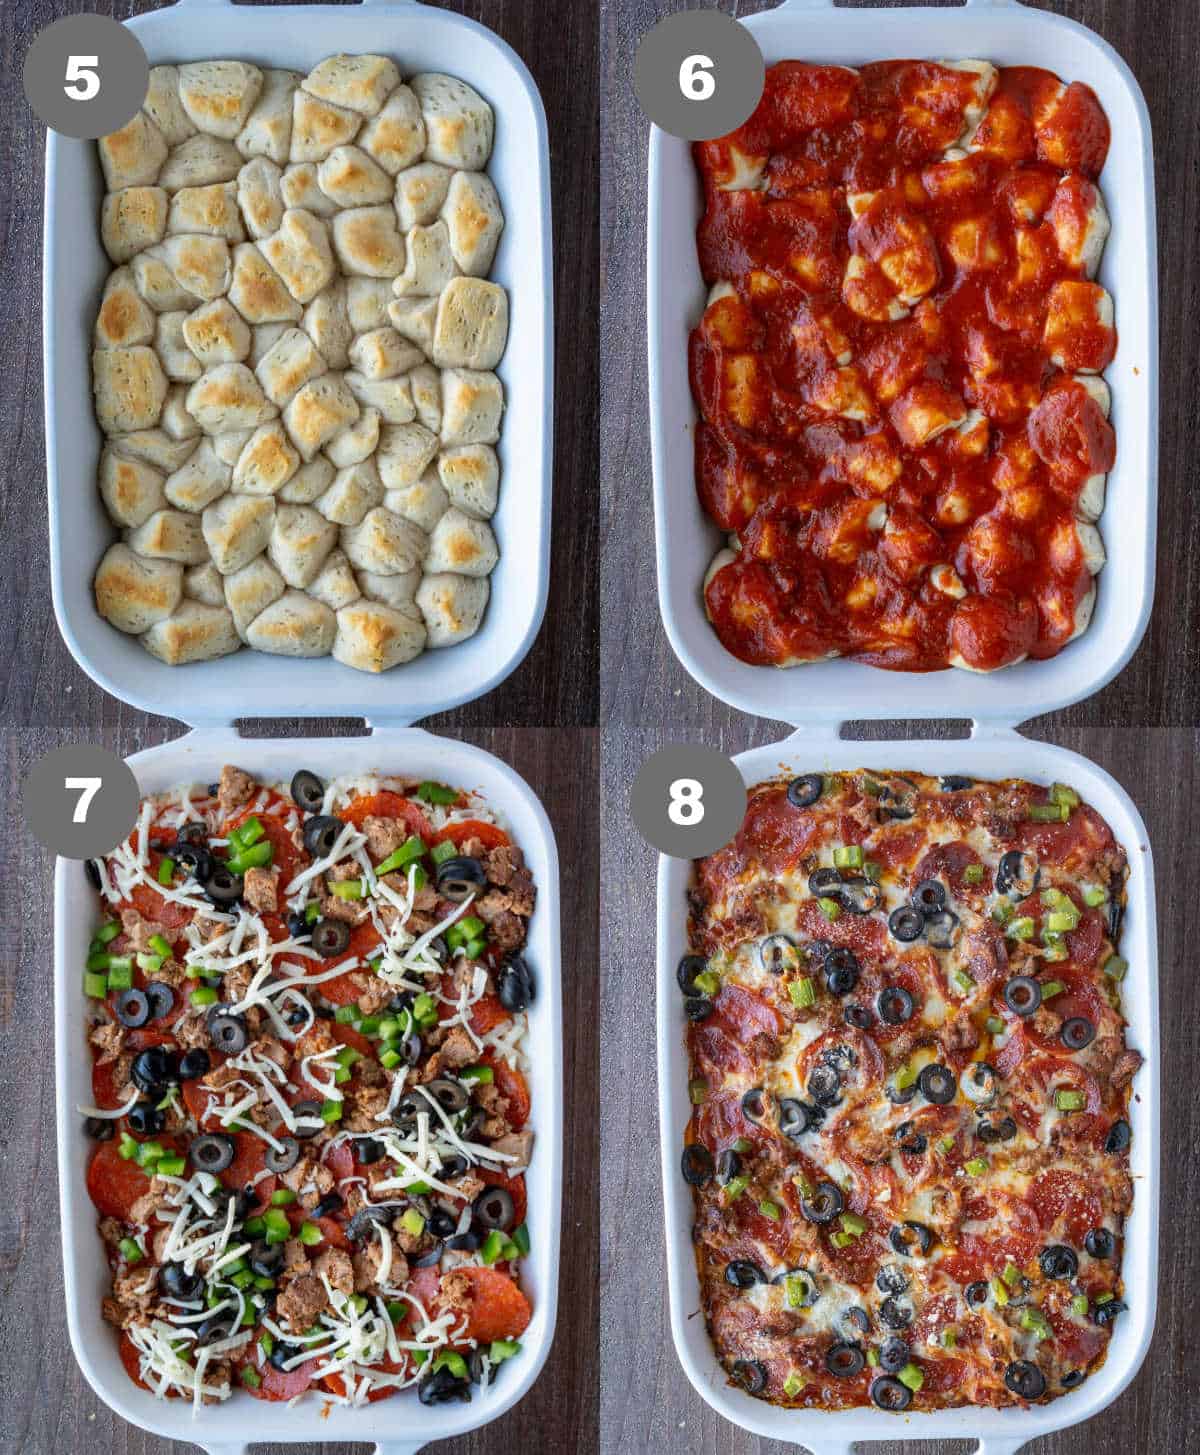 Steps 5 through 8 of making bubble up pizza bake.